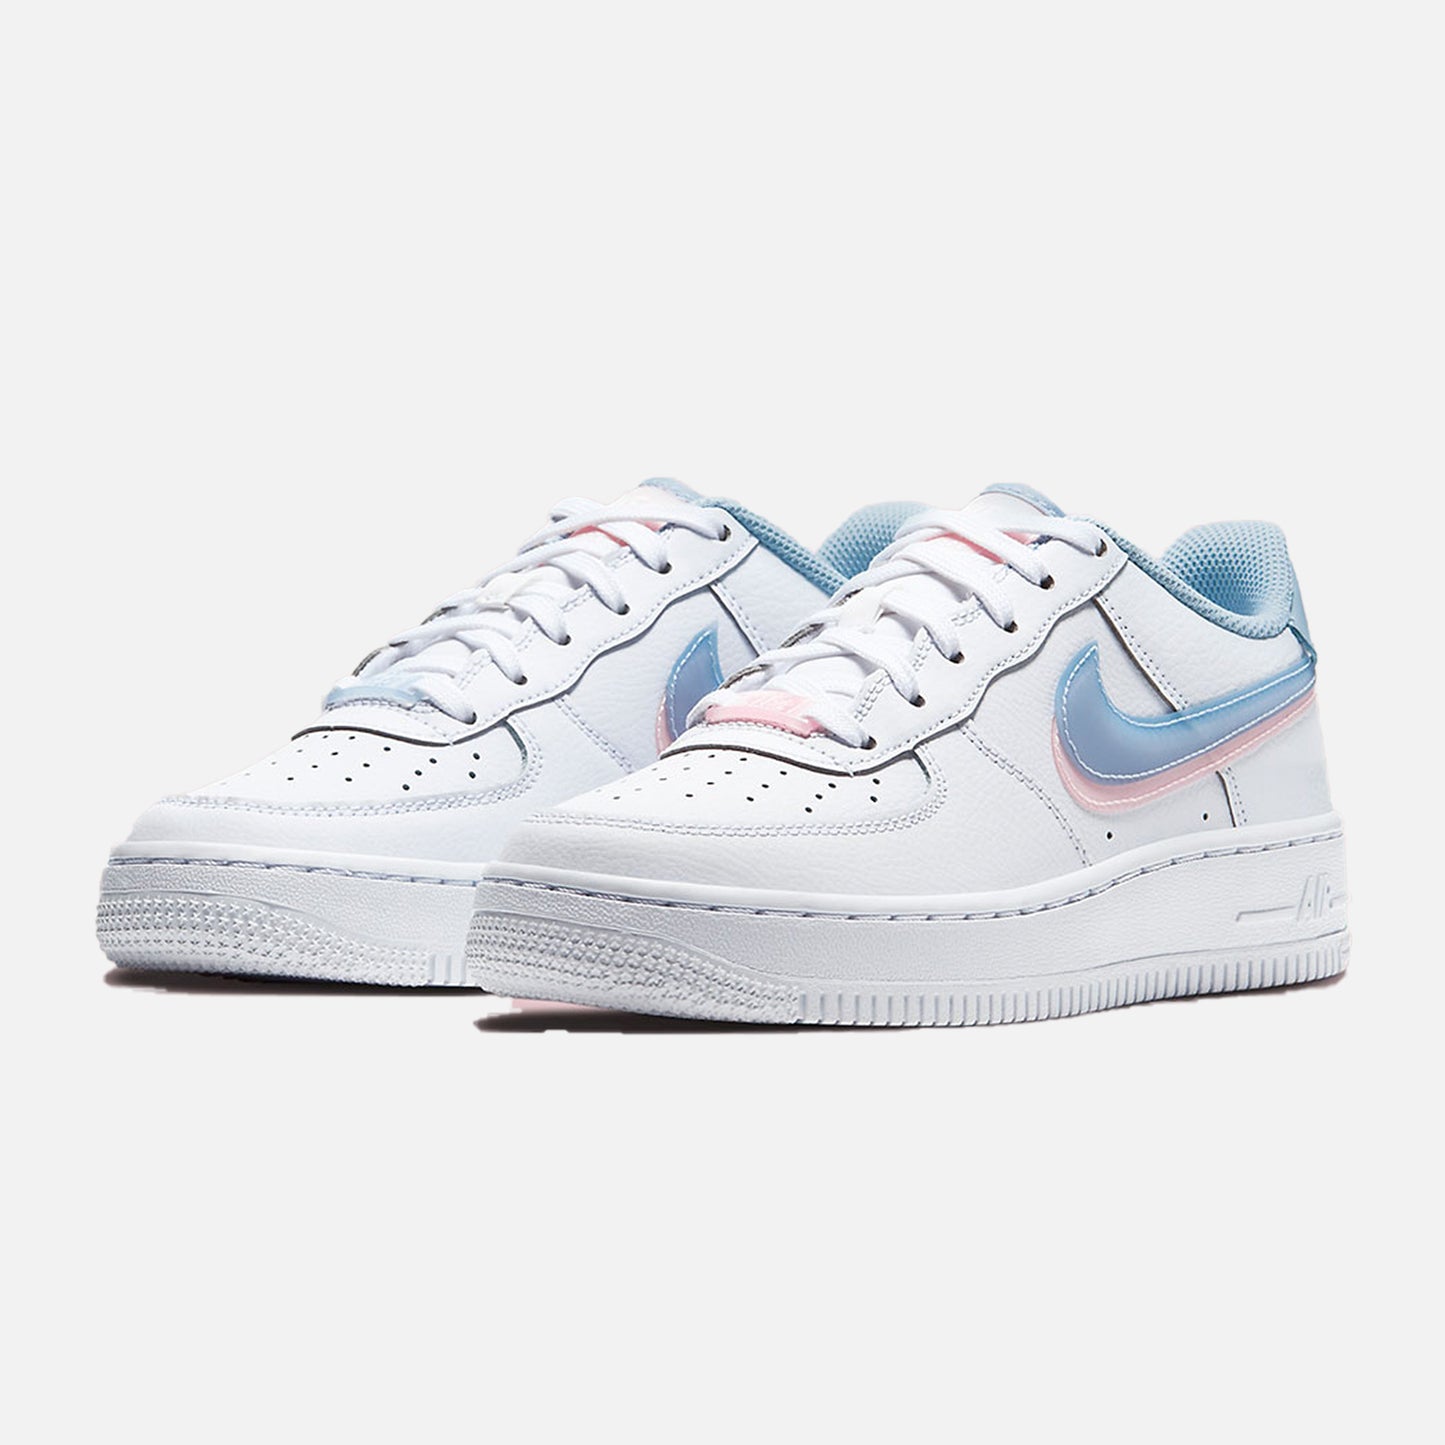 AIR FORCE 1 WHITE ARCTIC PUNCH LIGHT ARMORY BLUE